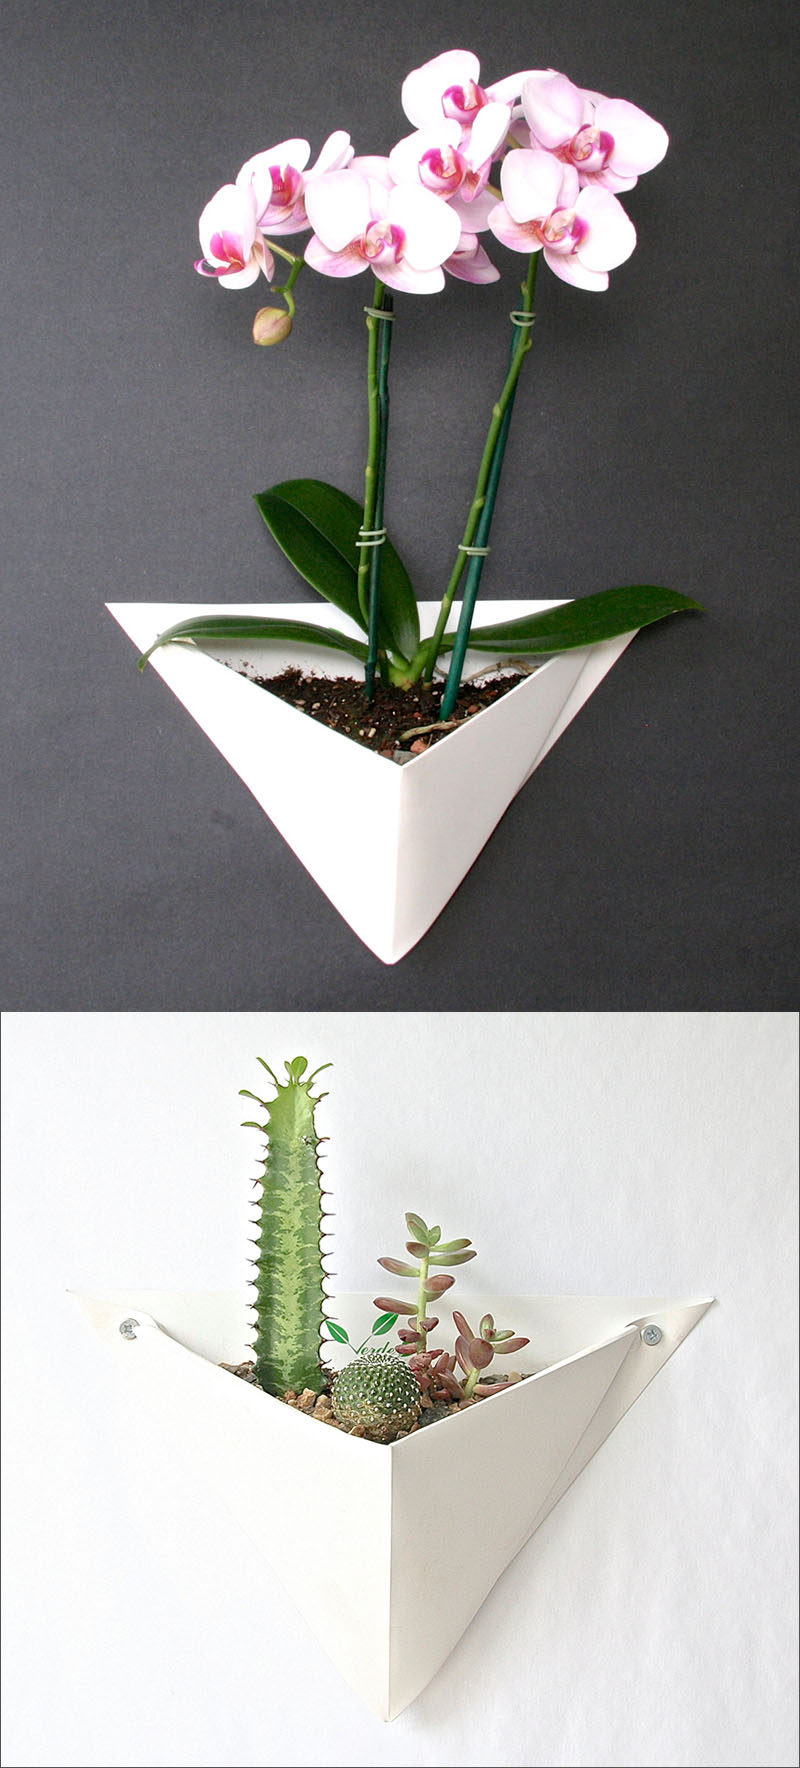 10 Modern  Wall  Mounted Plant  Holders To Decorate Bare Walls 